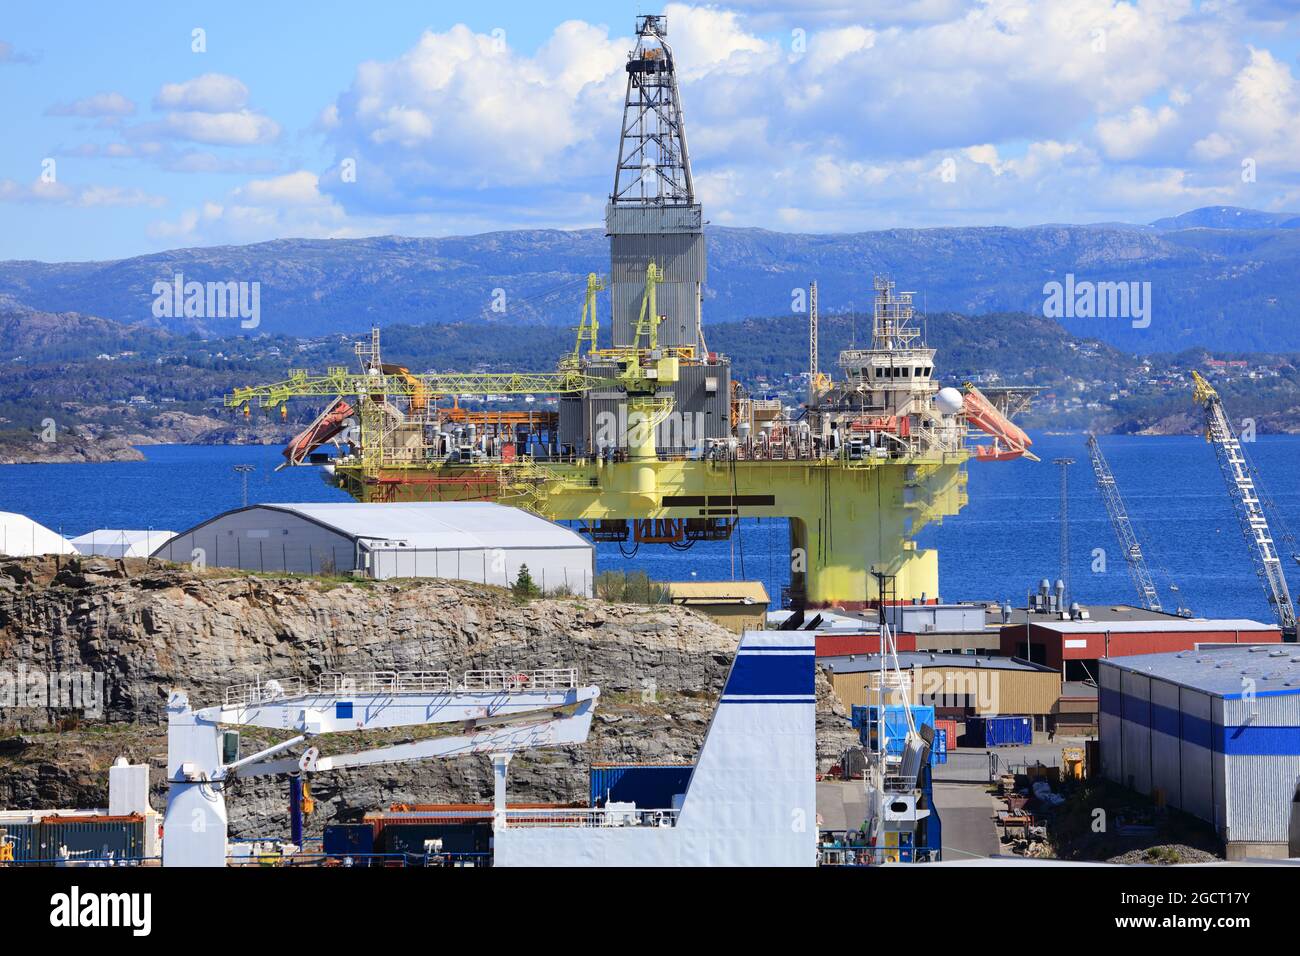 Offshore drilling rig maintenance in a fiord near Bergen, Norway. Oil industry structure. Stock Photo